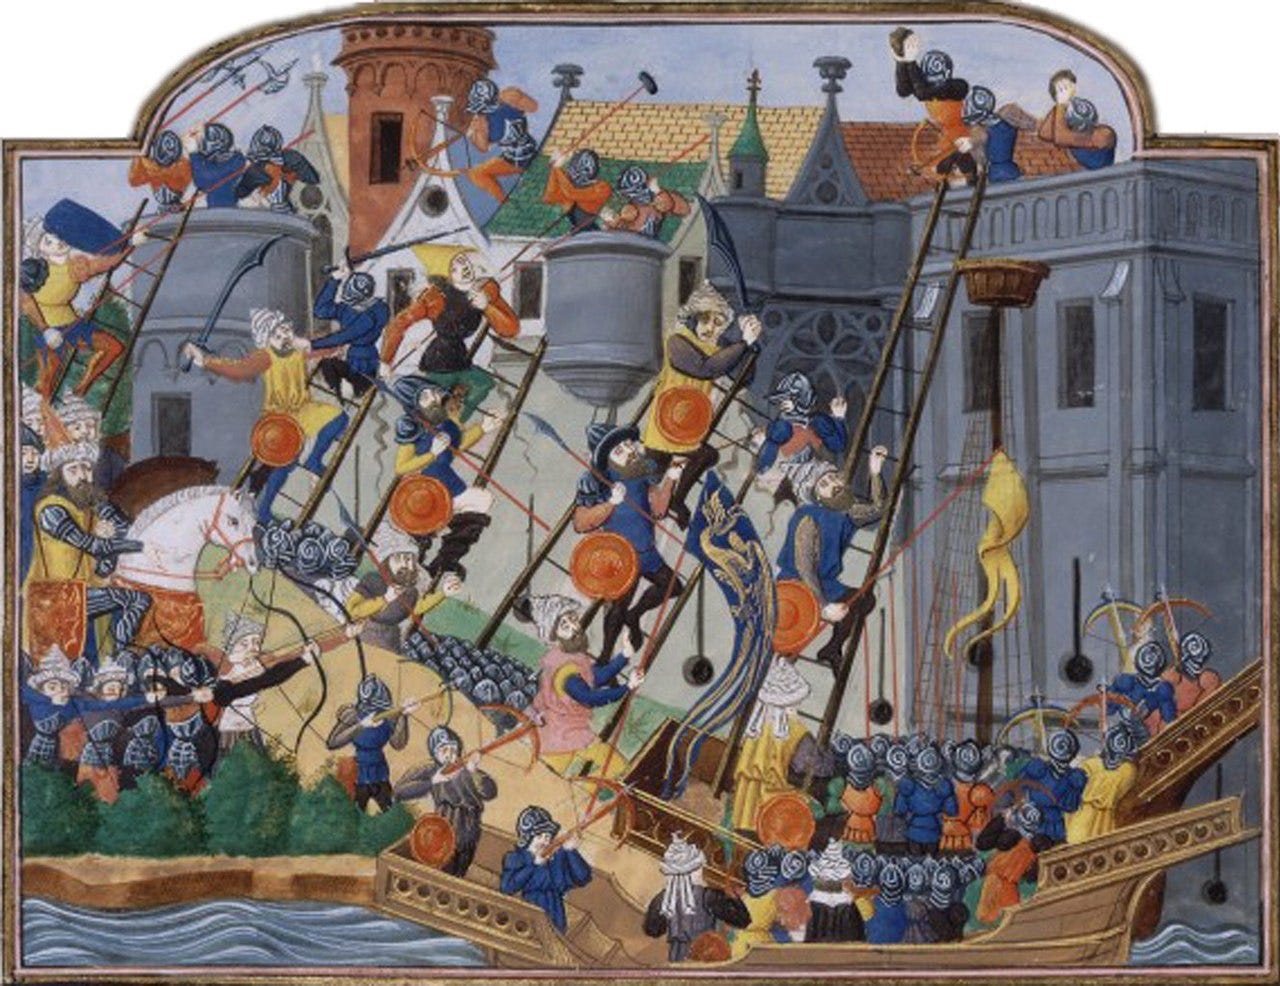 File:Siege constantinople bnf fr2691.jpg - Wikimedia Commons